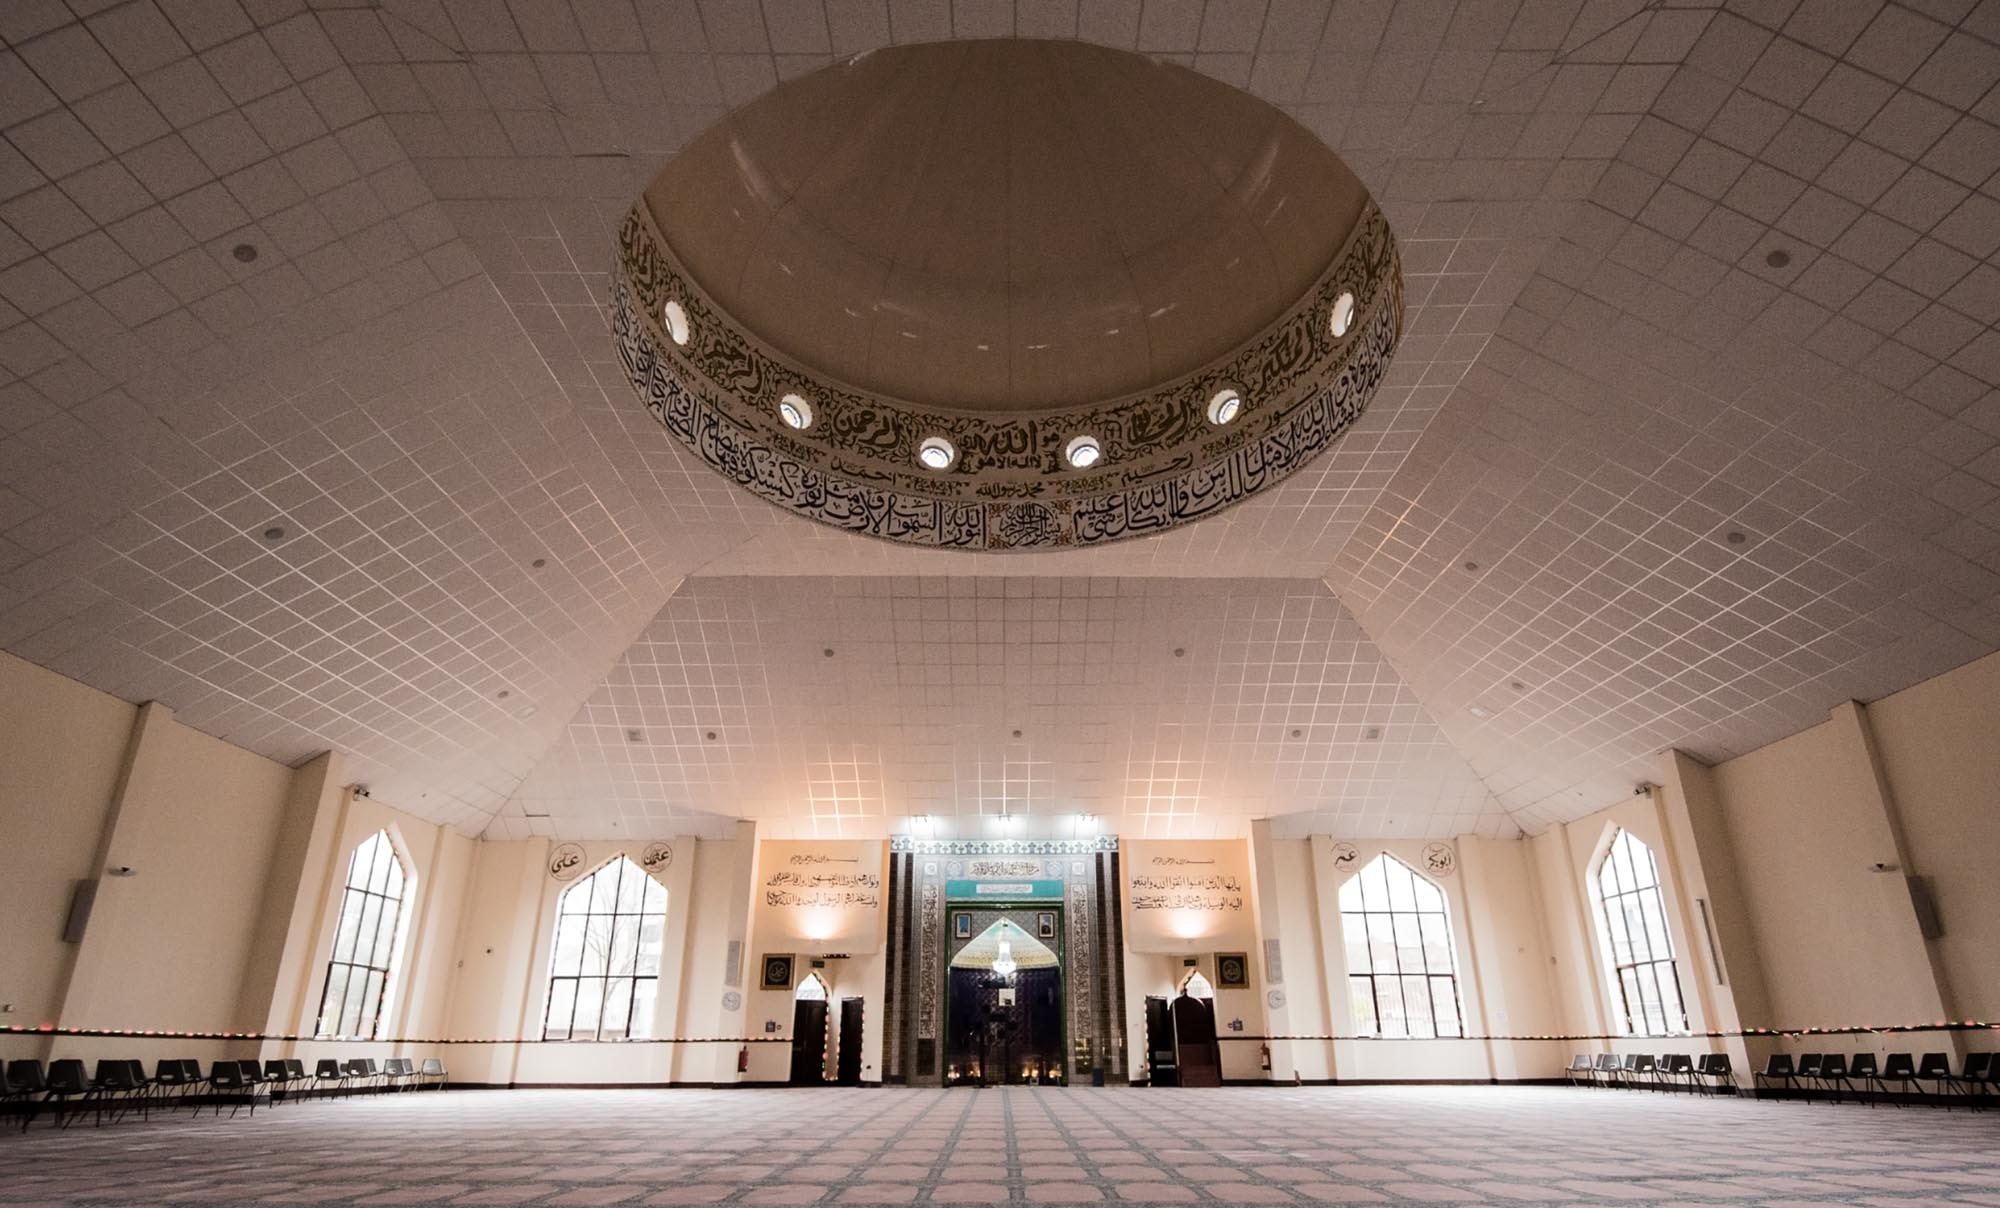 The impressive interior showing the inside of the dome -